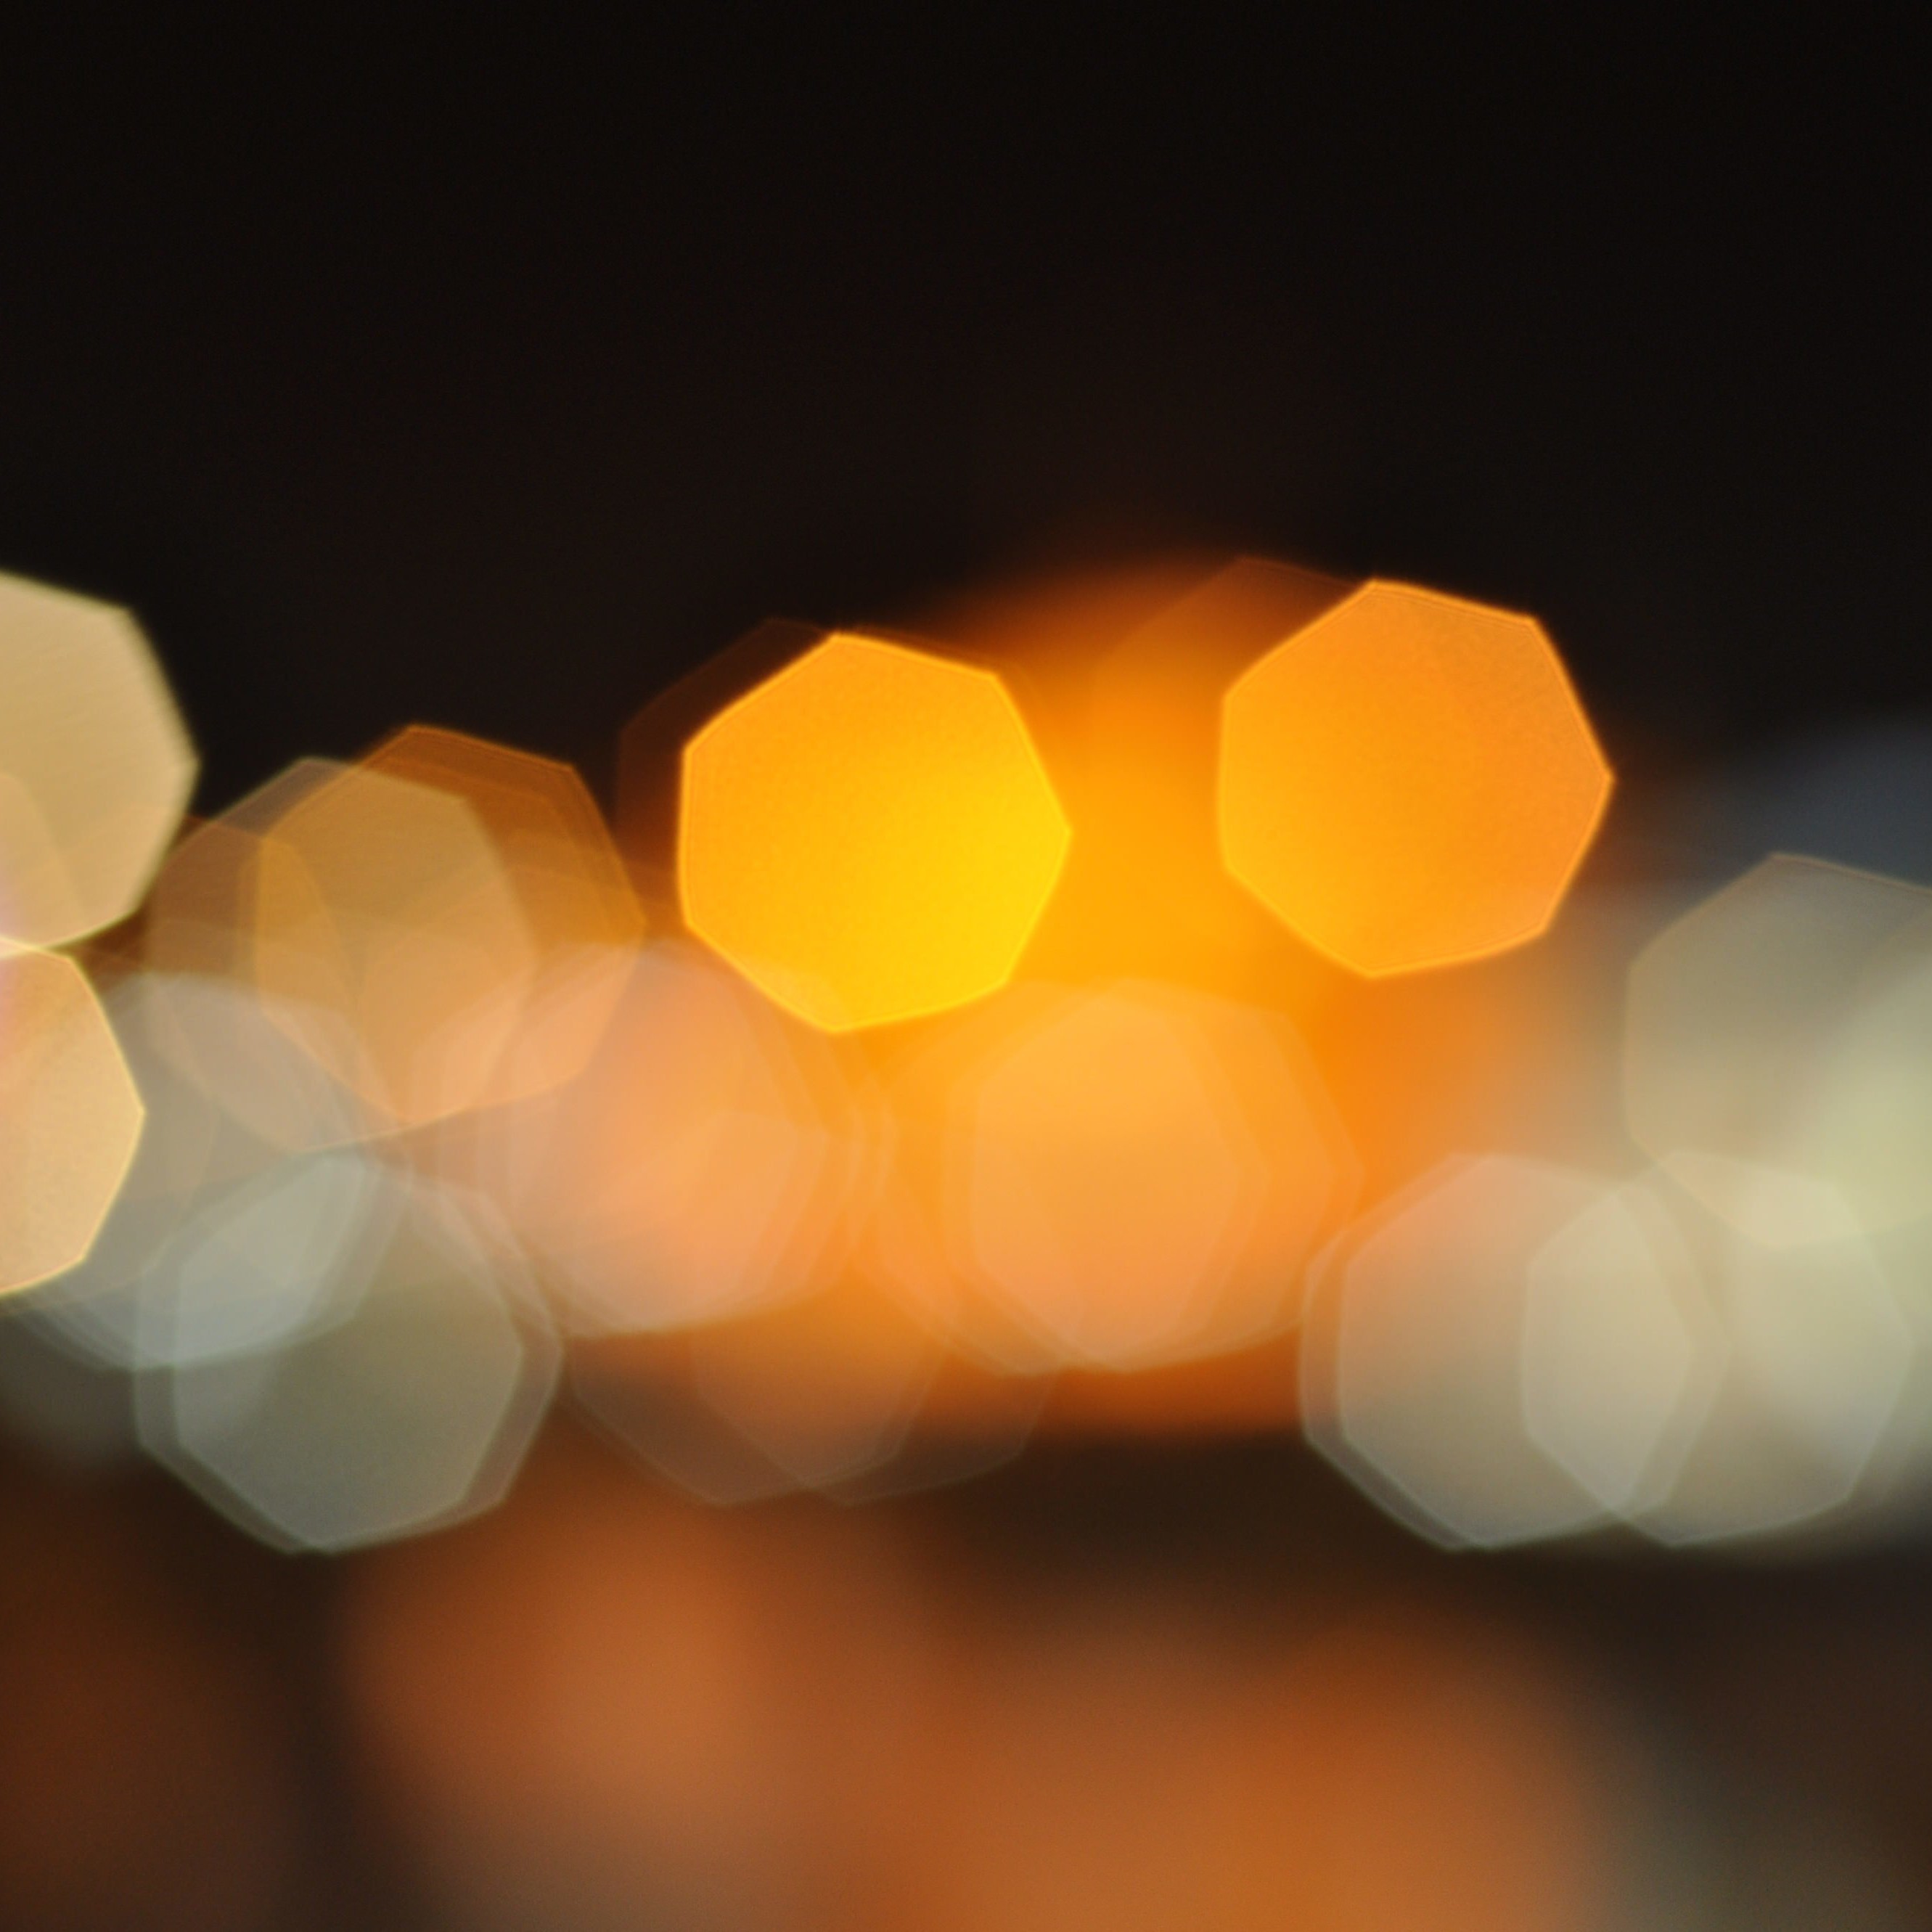 Blurred City Lights Wallpaper for Apple iPhone 6 Plus